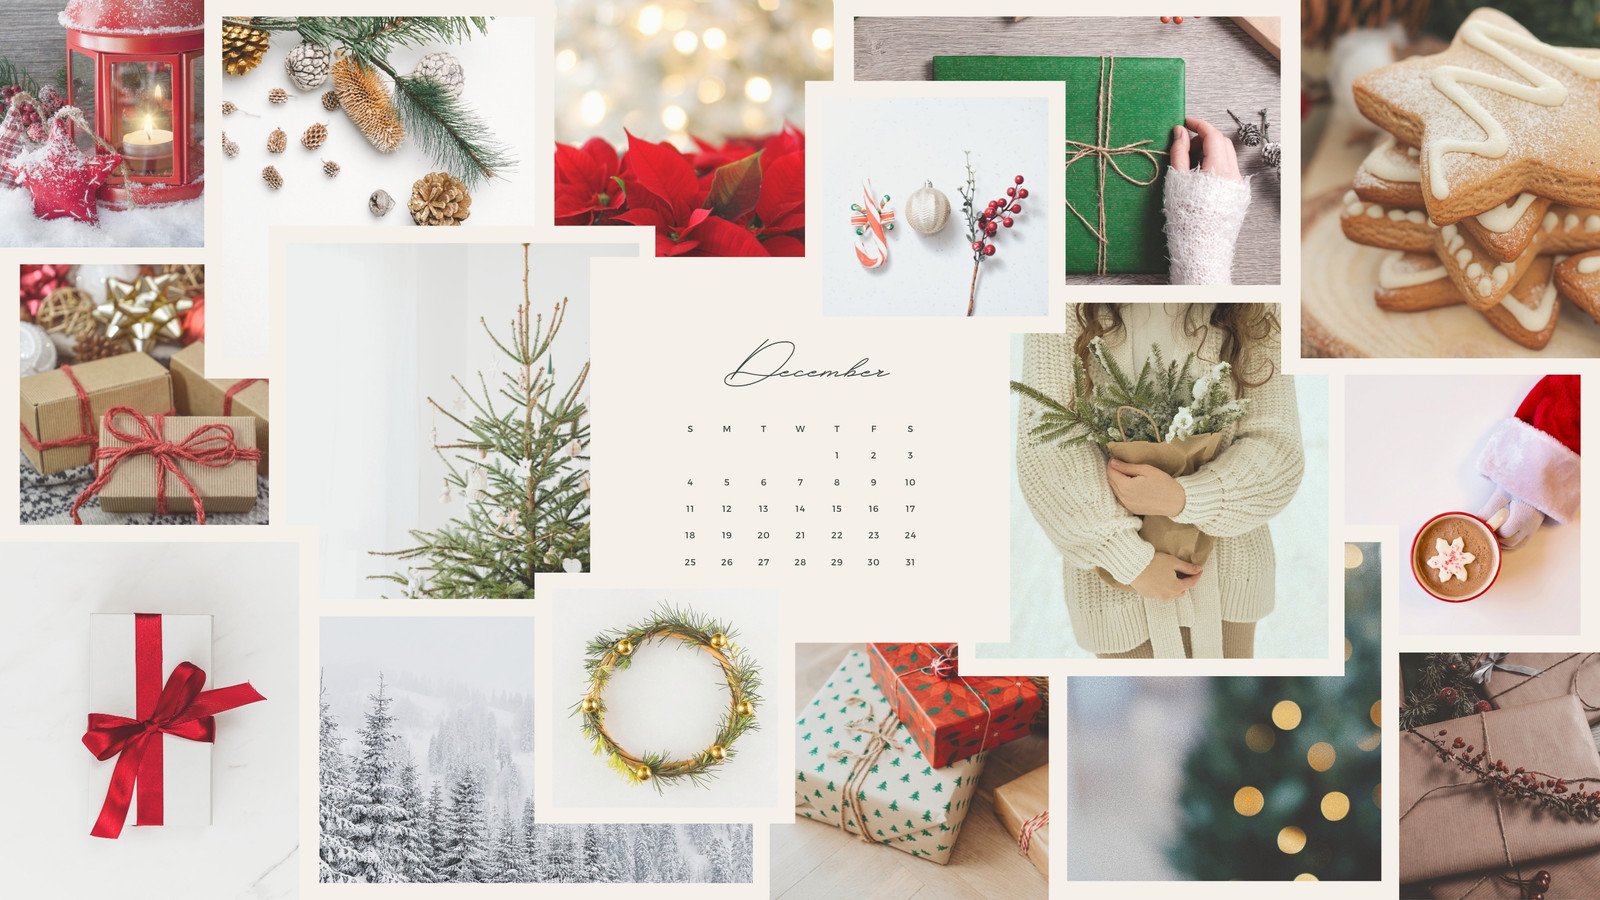 55 Free Christmas Wallpapers For iPhone - College Savvy